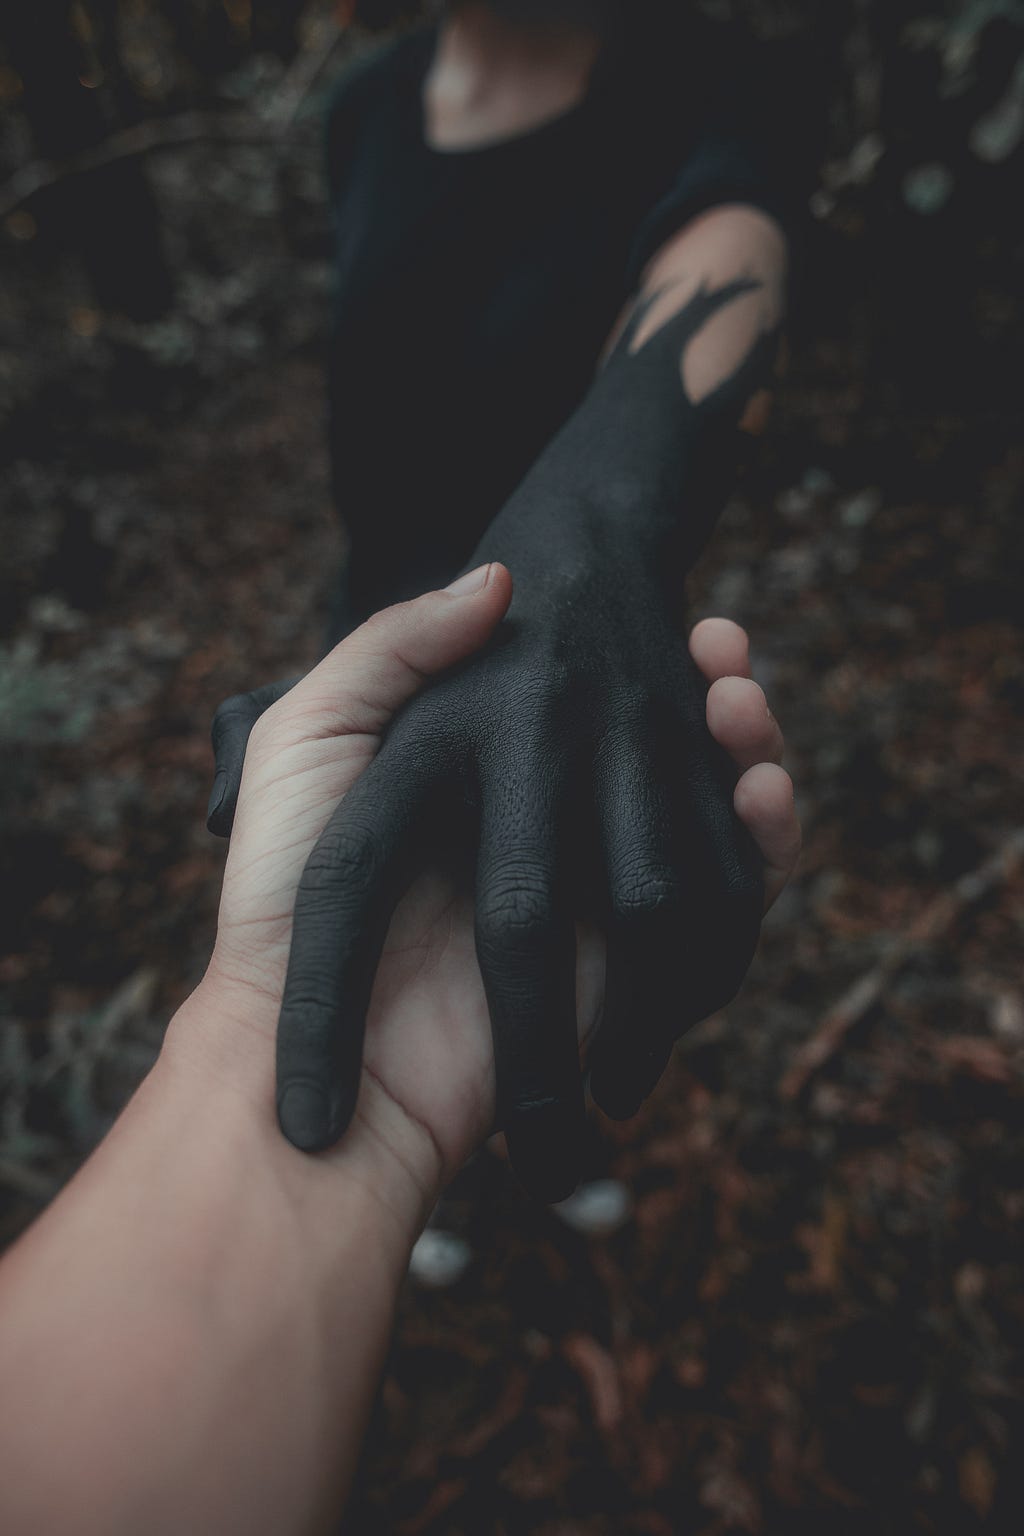 holding hands with dark colored hand, darkness, inner darkness, jealousy to others